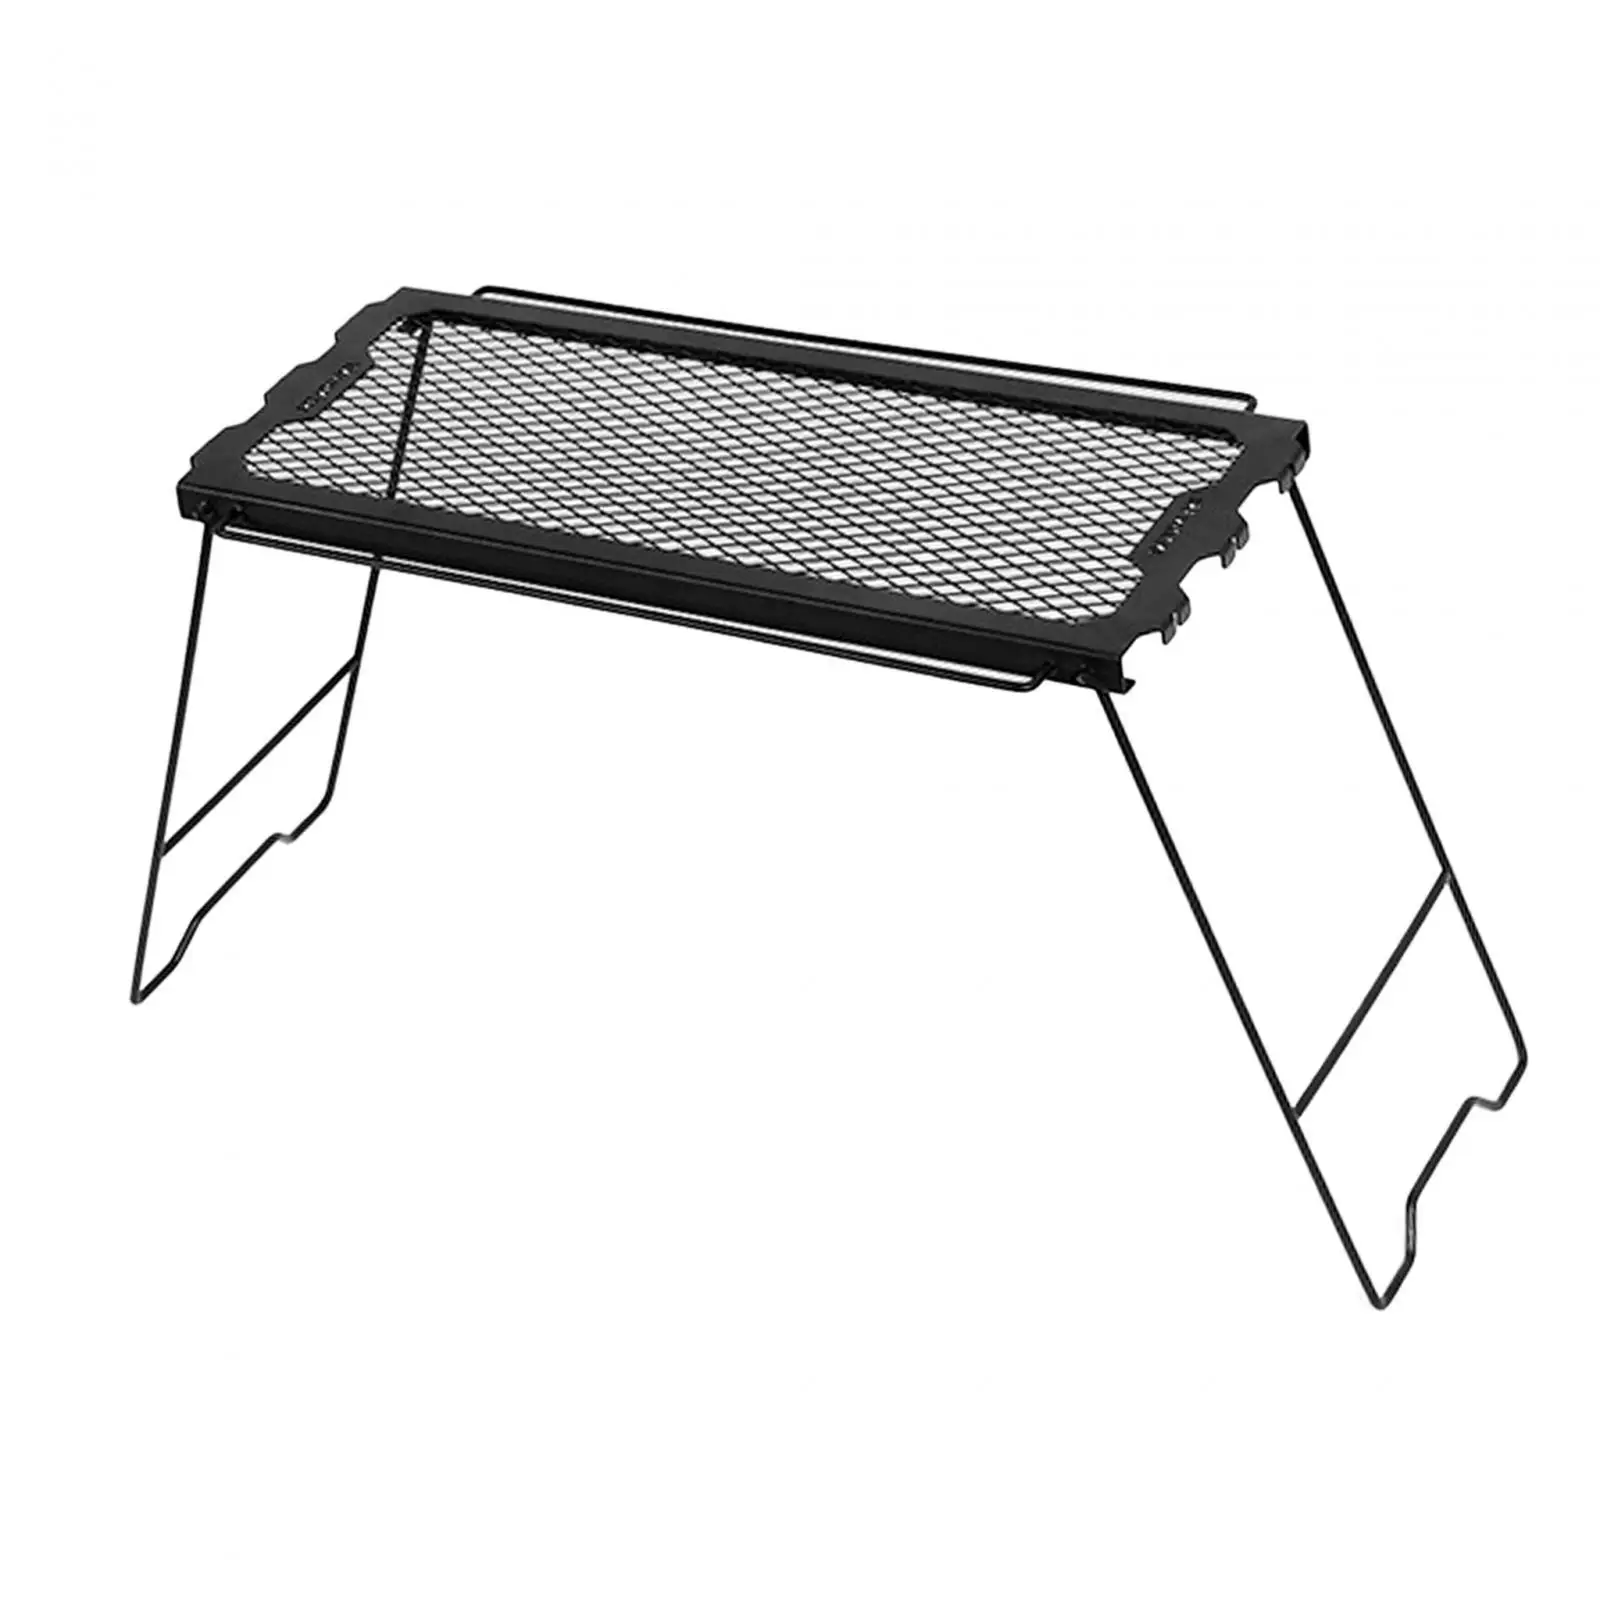 Folding Camping Table Camping Cooking Grate over Fire for RV Hiking Garden